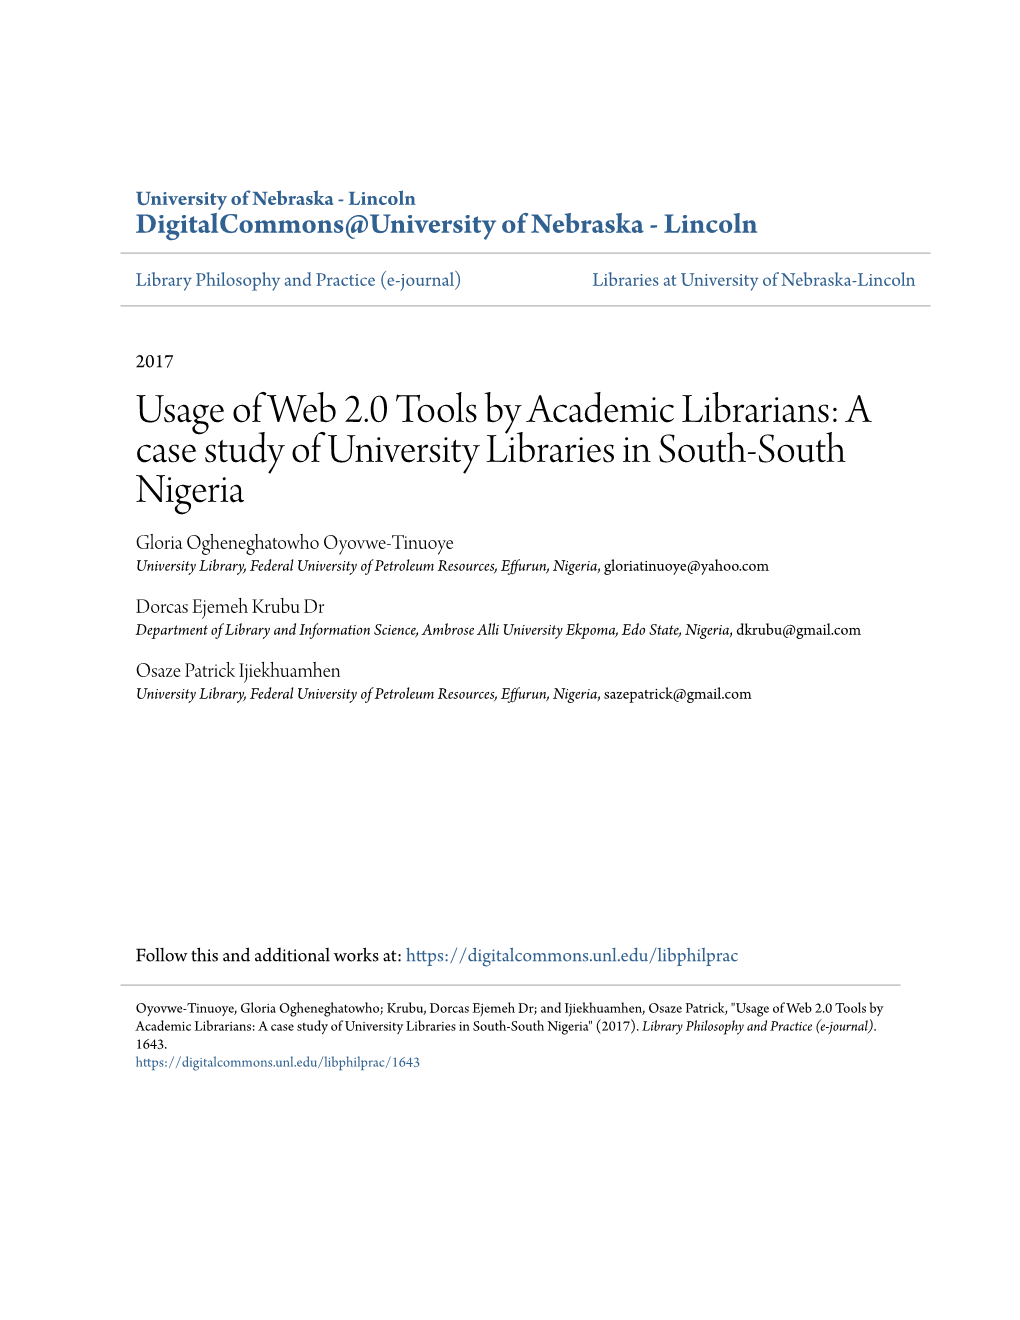 Usage of Web 2.0 Tools by Academic Librarians